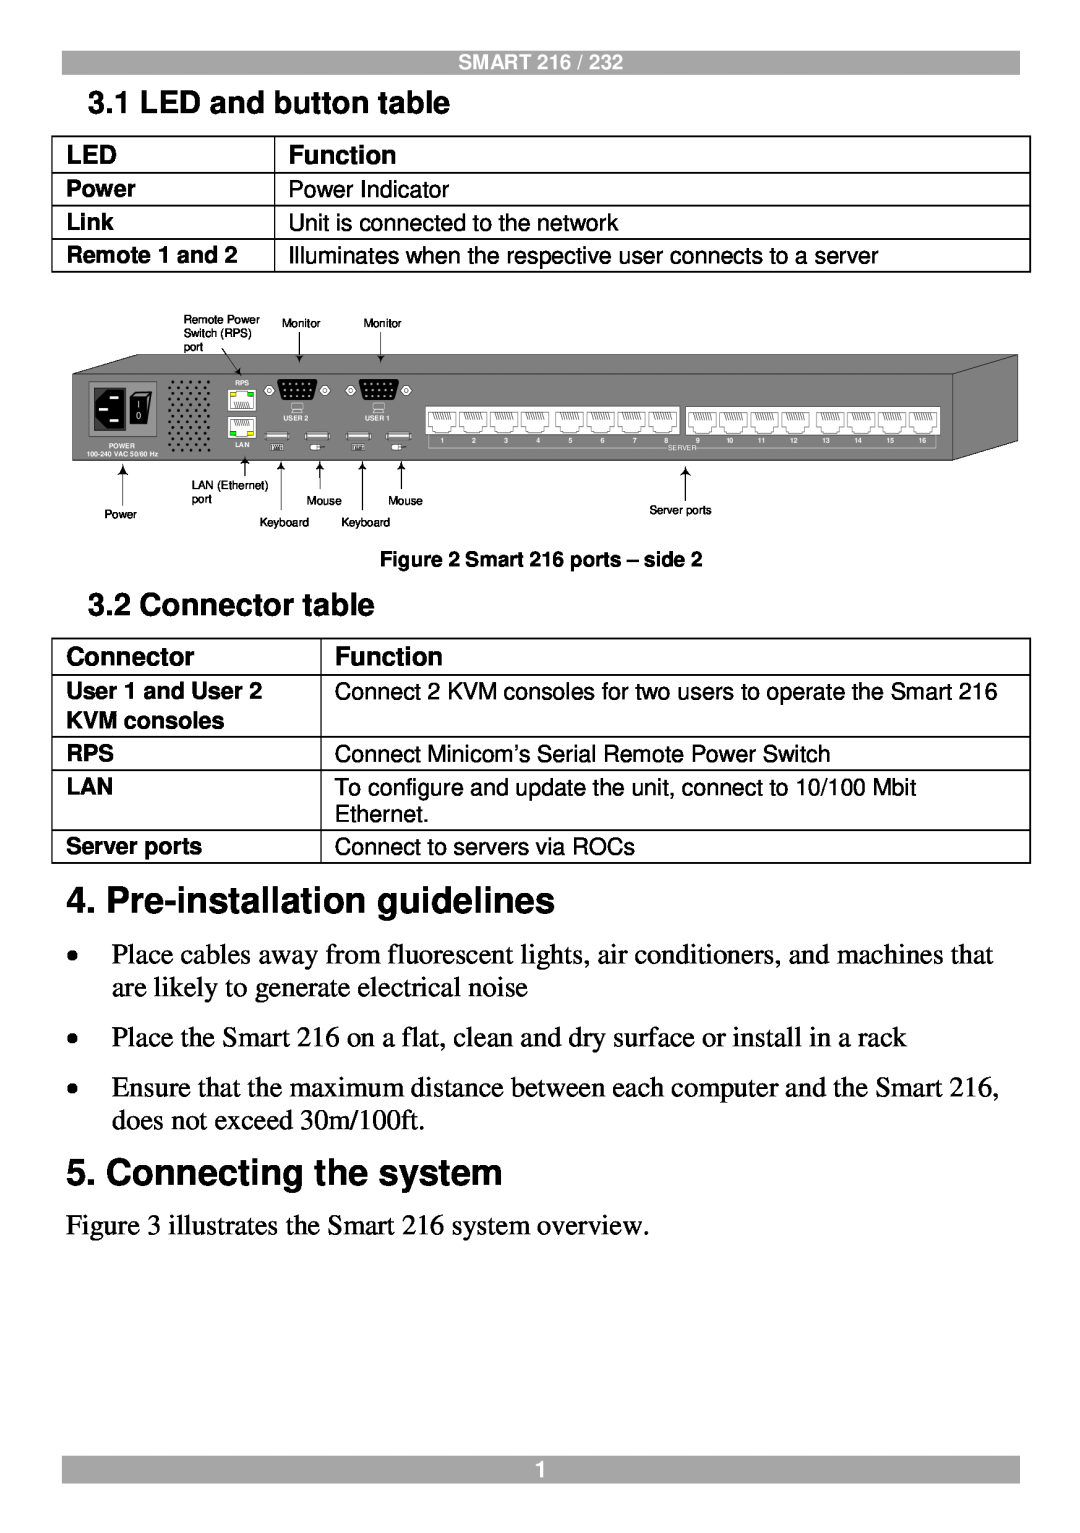 Tripp Lite 216, 232 quick start Pre-installation guidelines, Connecting the system, LED and button table, Connector table 